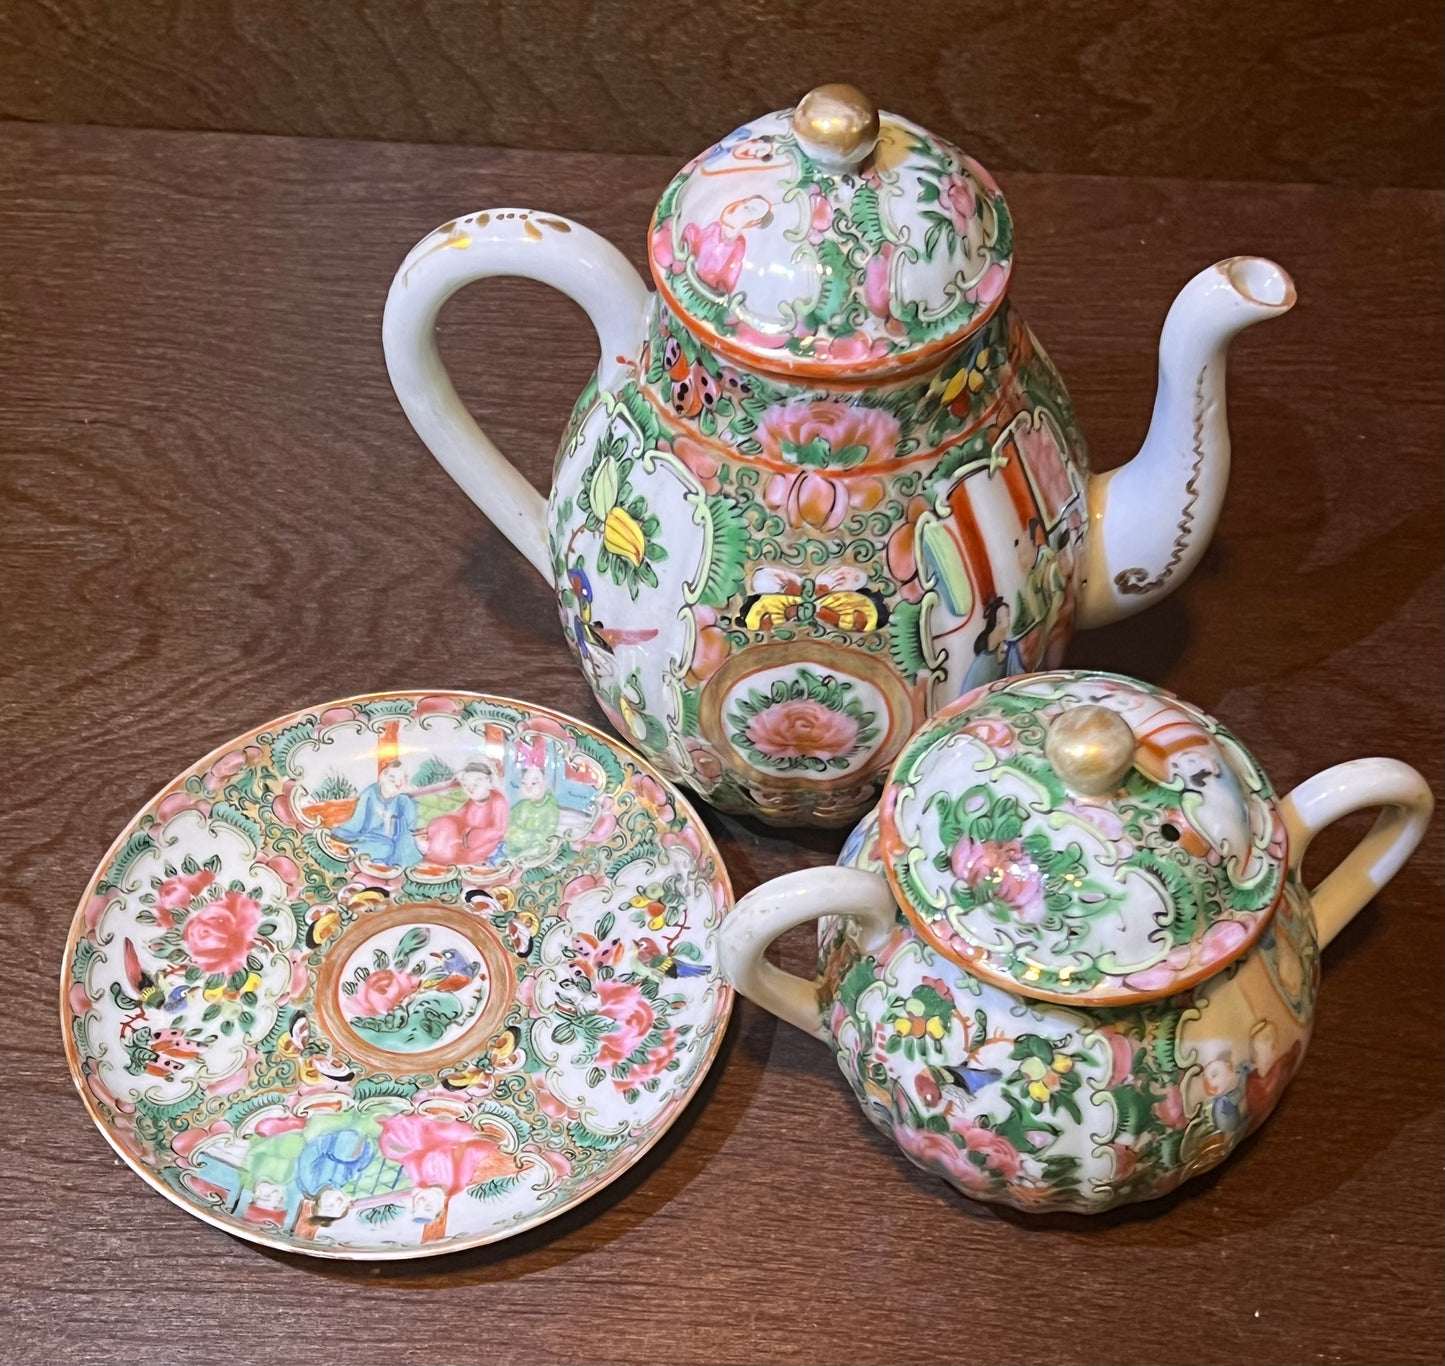 Antique Rose Medallion Teapot and Accoutrements